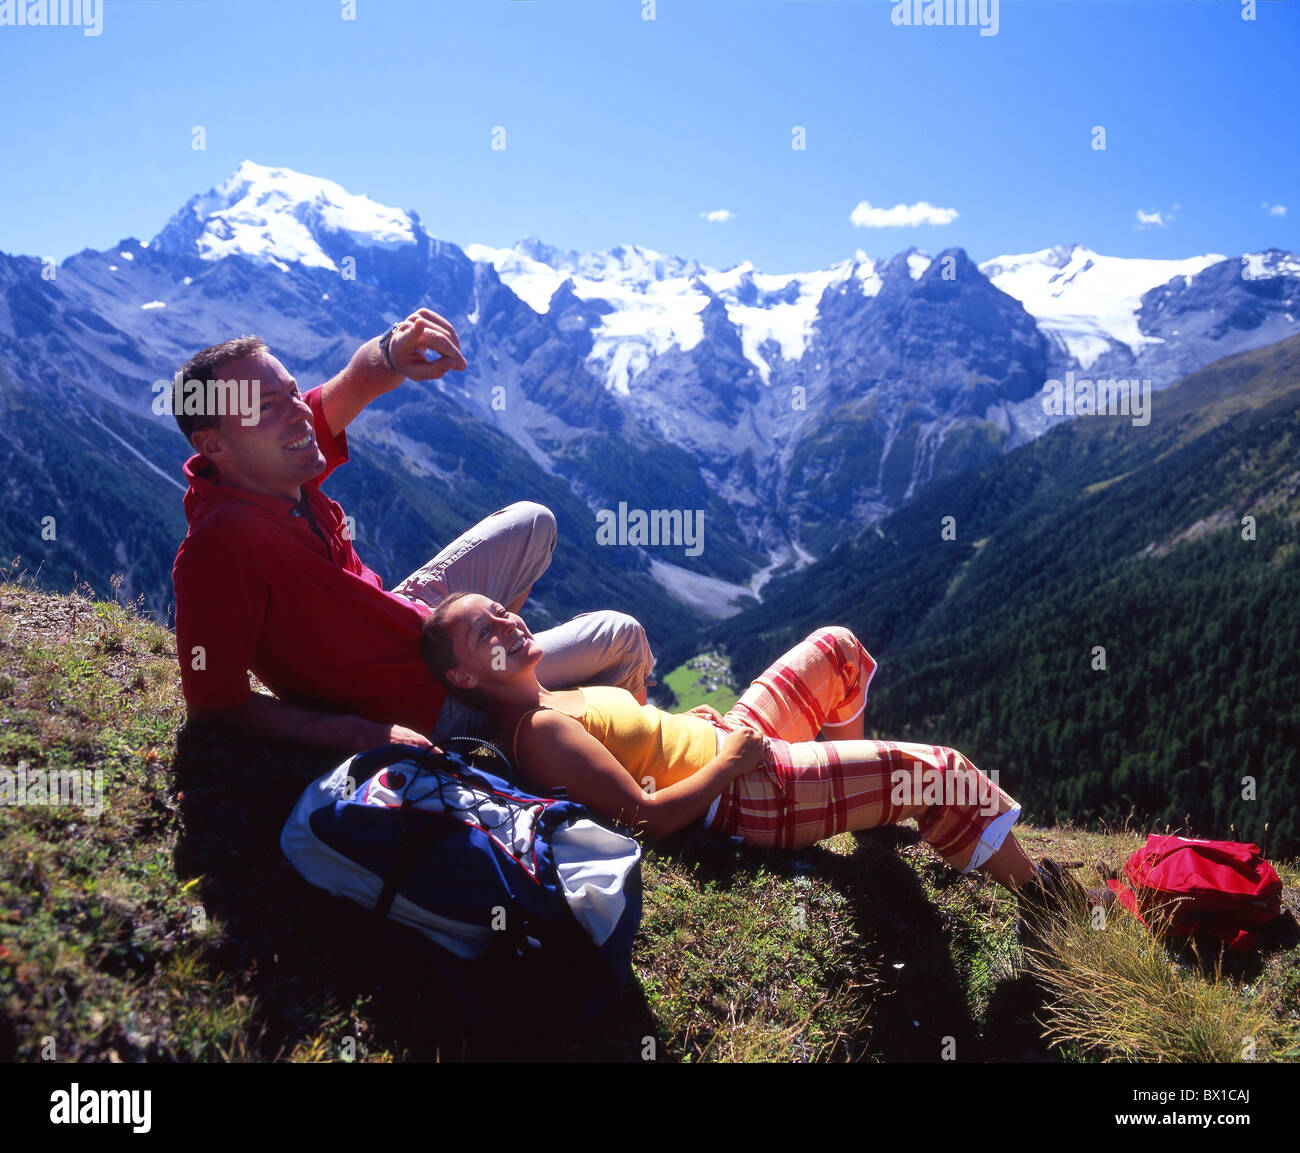 Hiking hiker couple relax rest mountains Alps rest mountain hiking scenery landscape Vinschgau Italy Euro Stock Photo